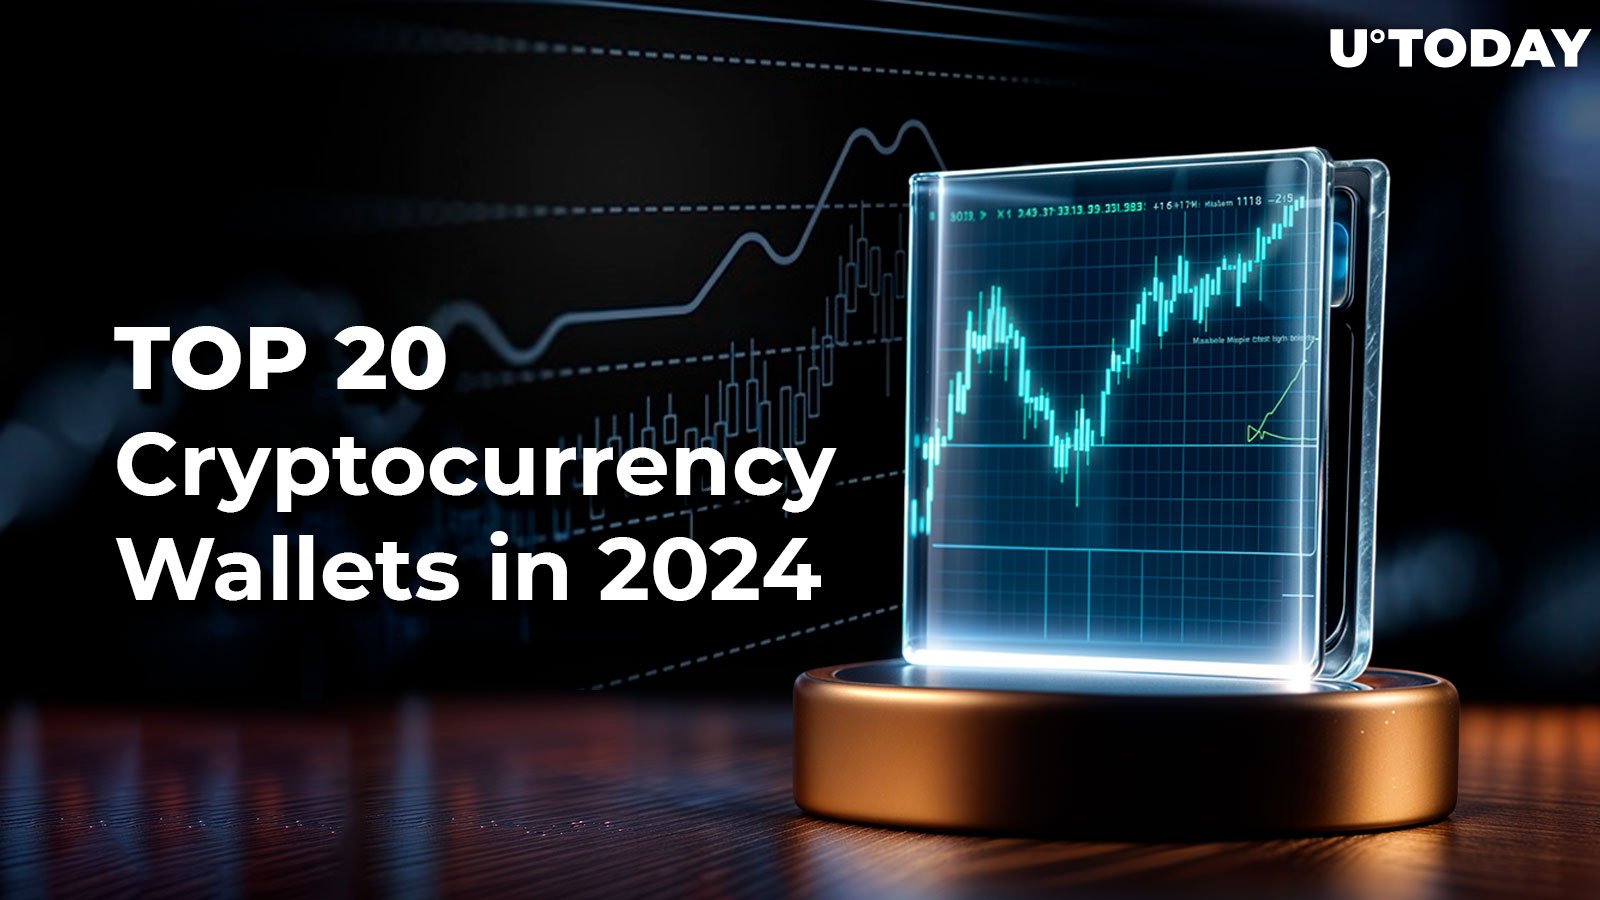 Top 20 Cryptocurrency Wallets in 2024